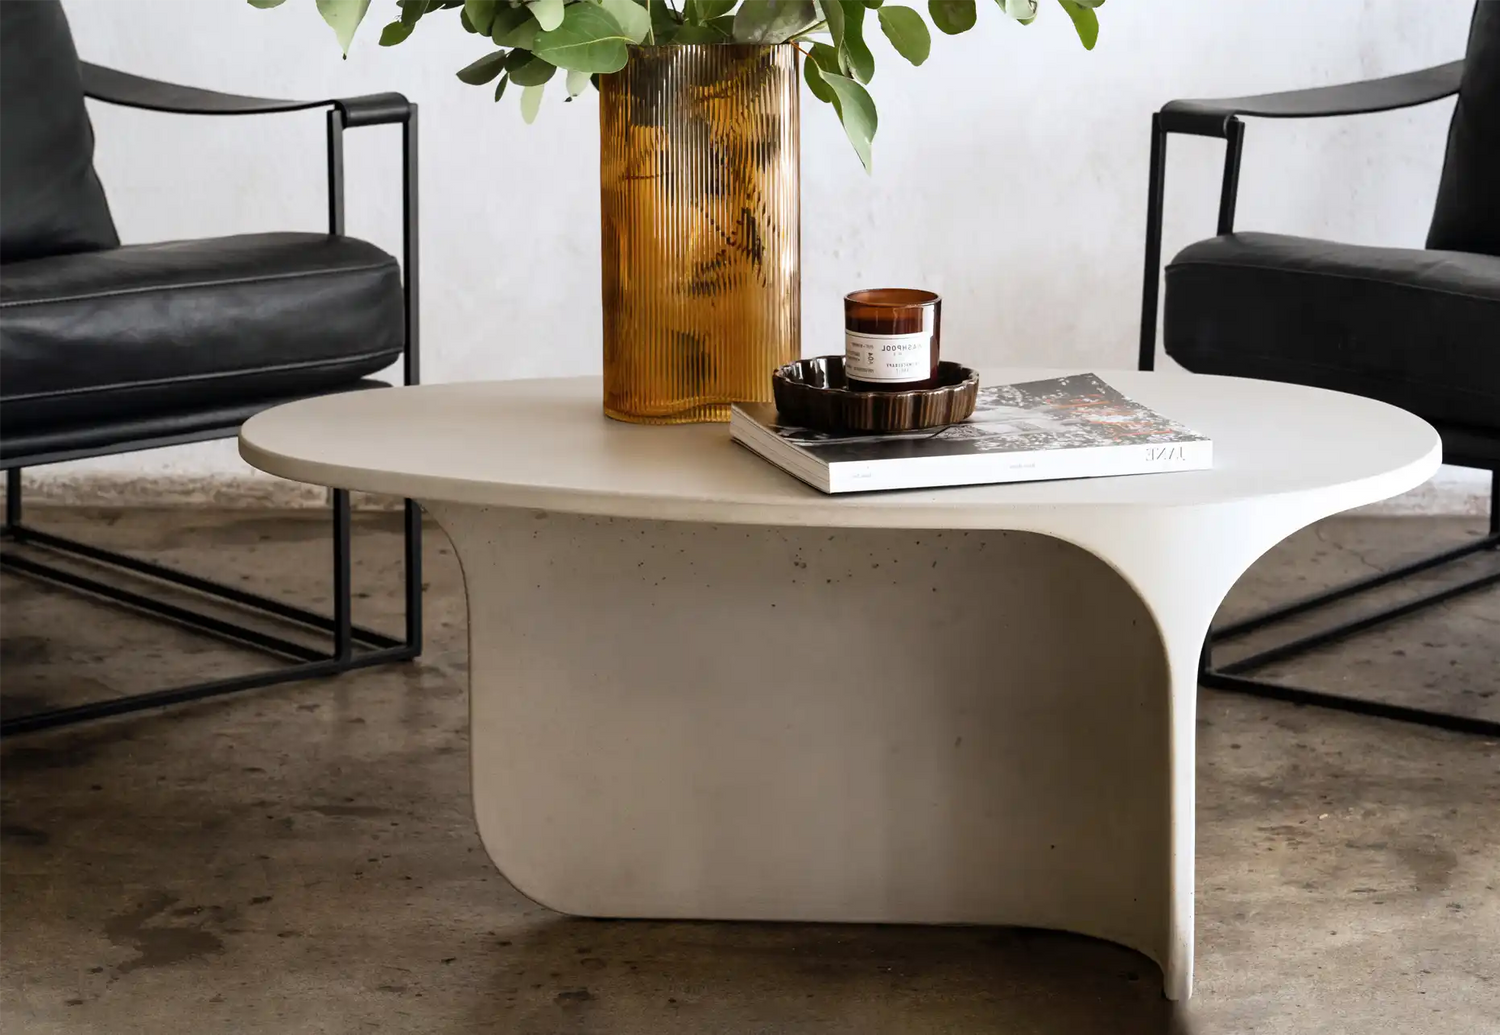 A Mist Grey Riviera Concrete Coffee Table set with two black leather Coco Republic occasion chairs with a vase and magazine.